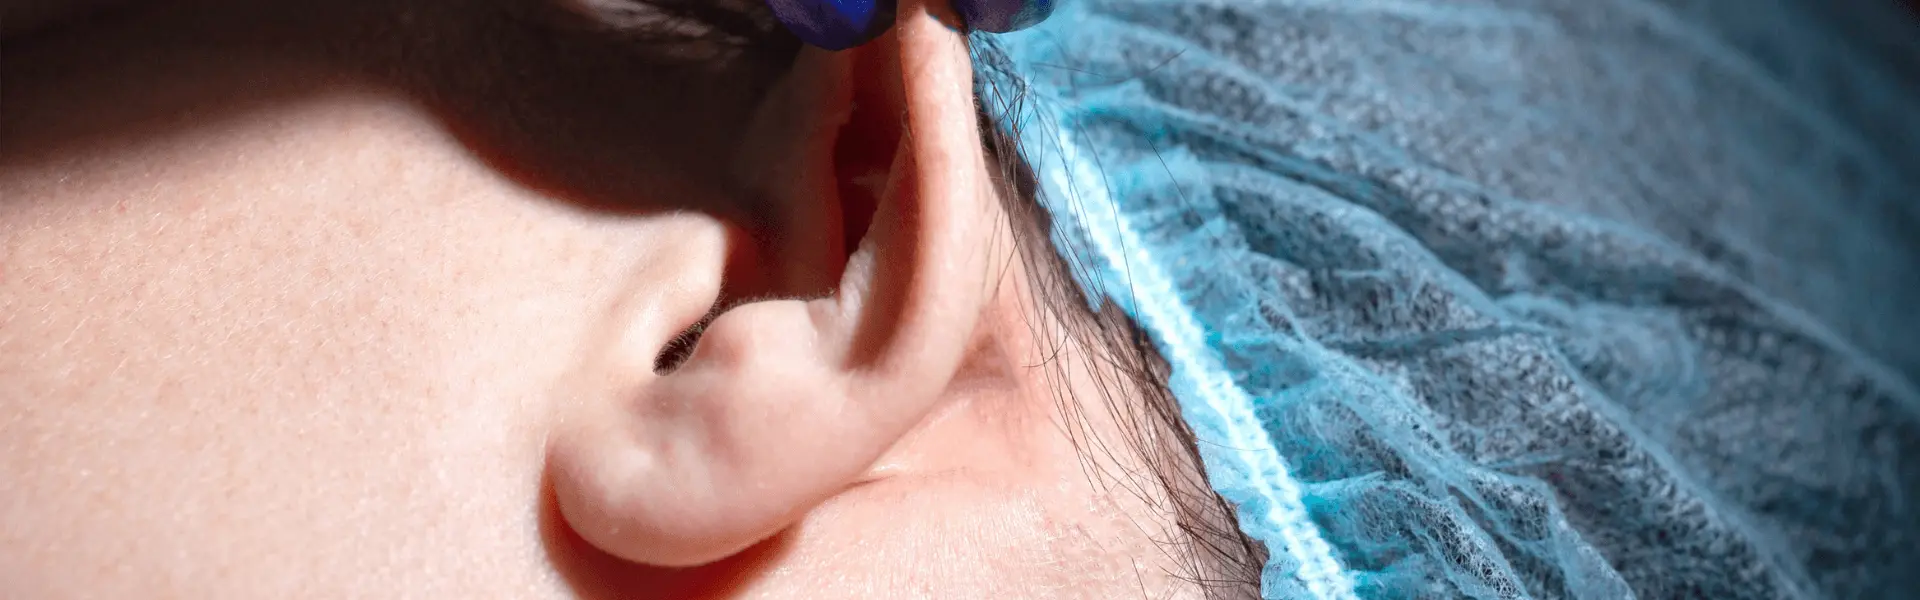 A close up of a person's ear.